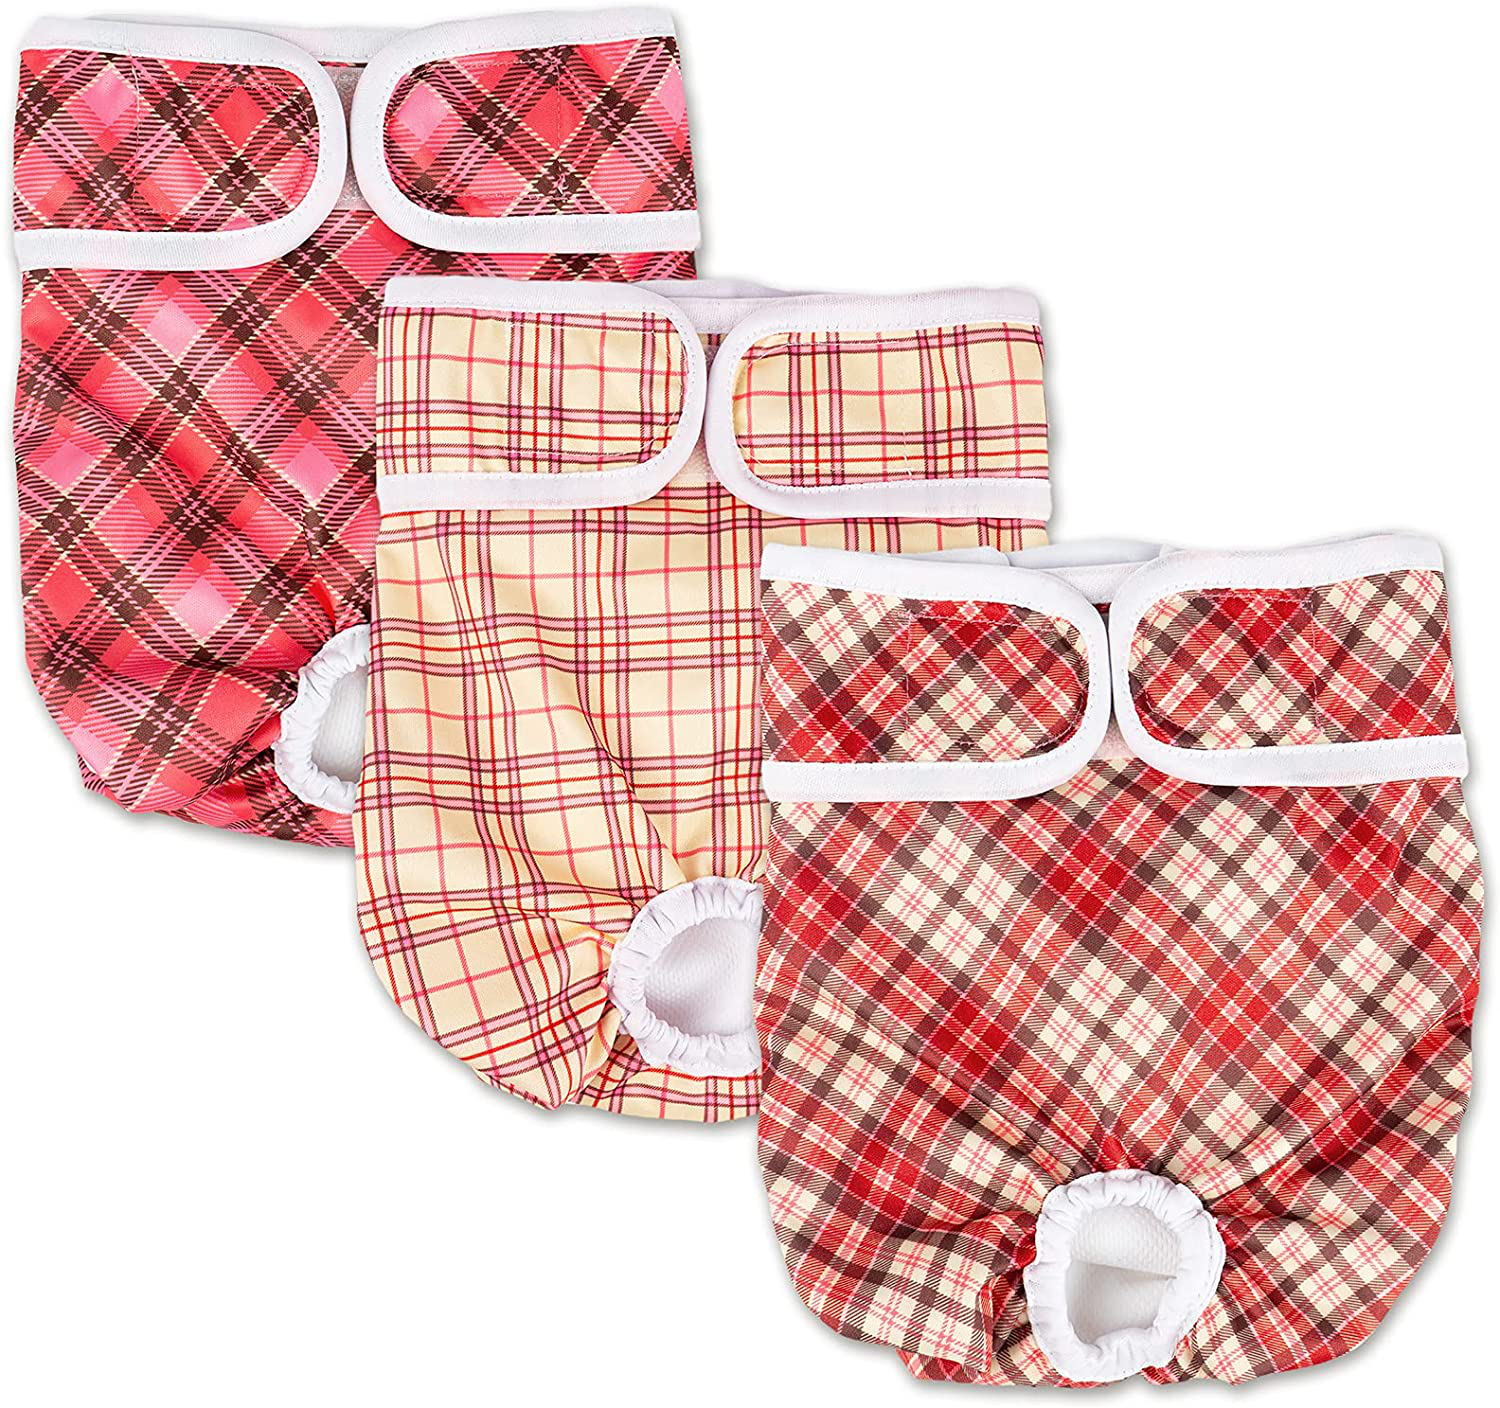 Pantula Washable Female Diapers (3 Pack) Female Dog Diapers, Comfort Reusable Doggy Diapers for Girl Dog in Period Heat